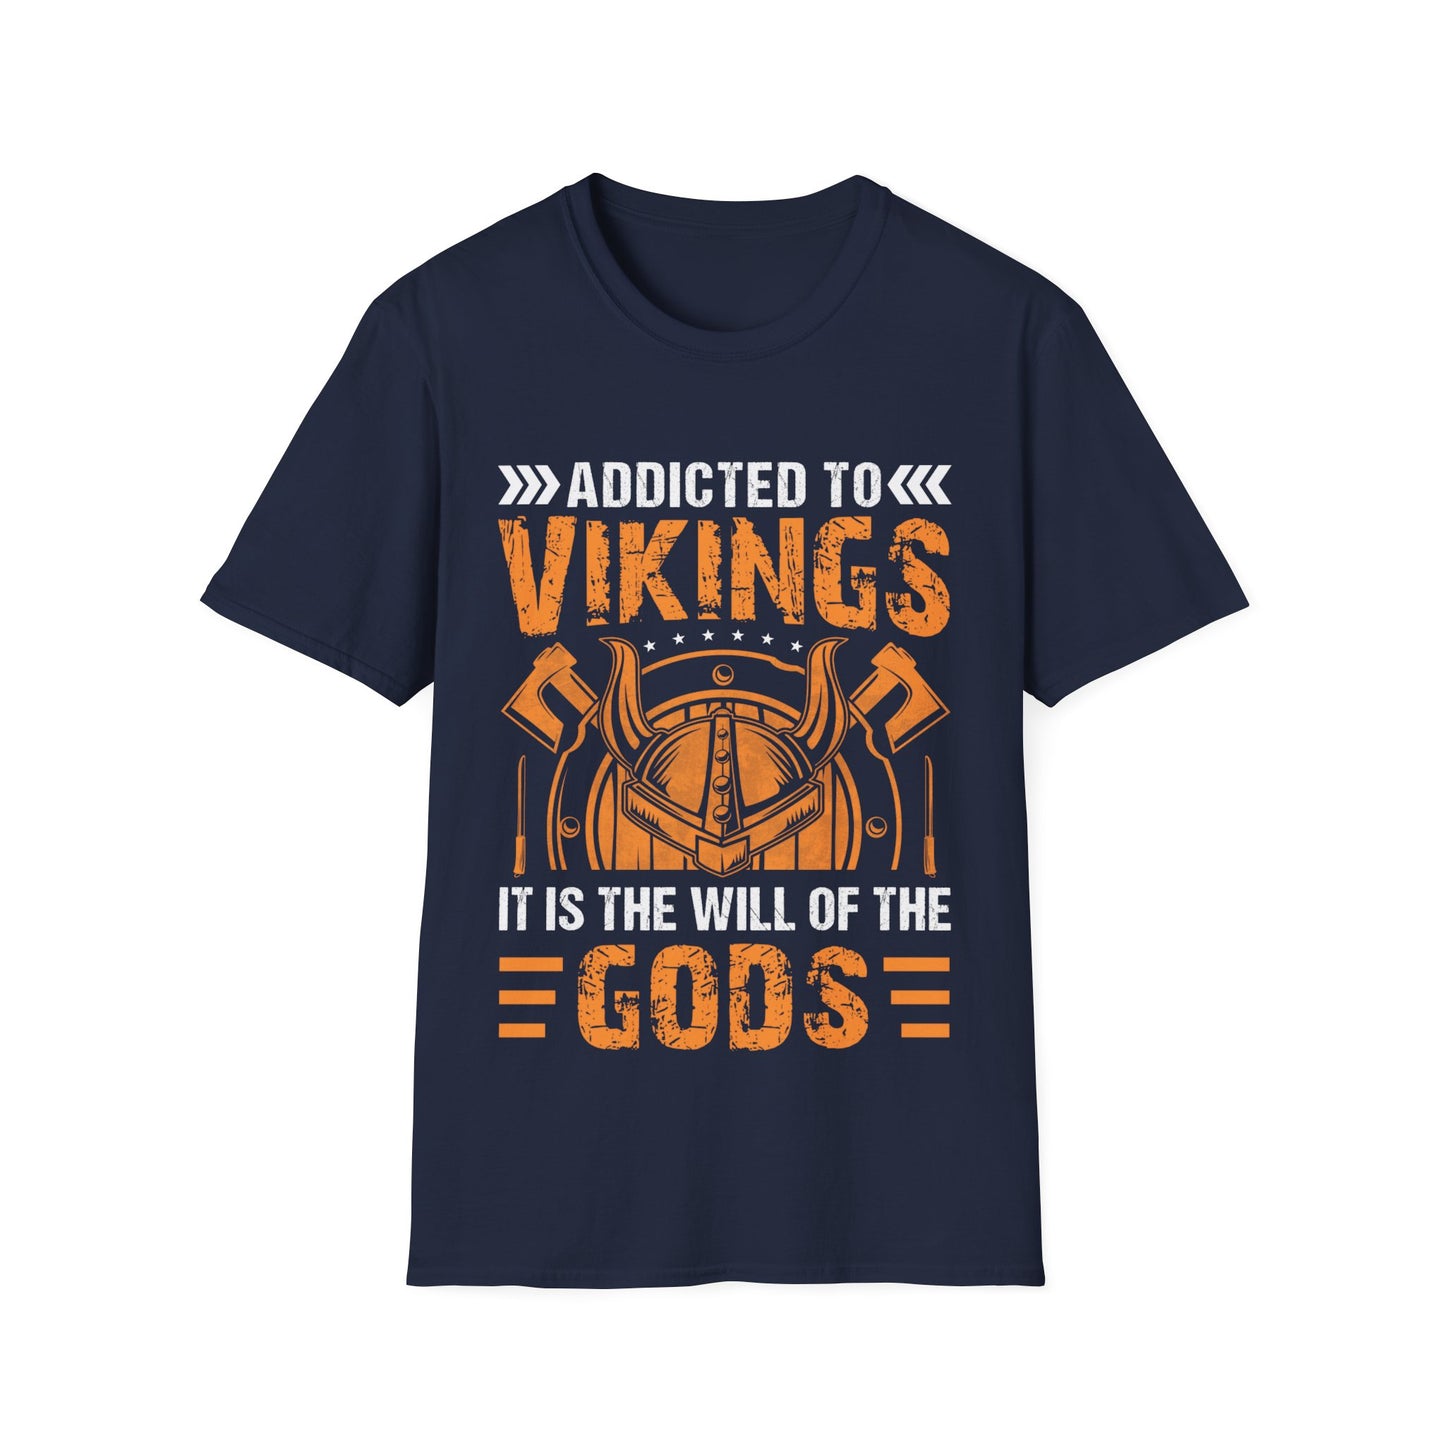 Addicted To Vikings It Is The Will Of Gods T-Shirt